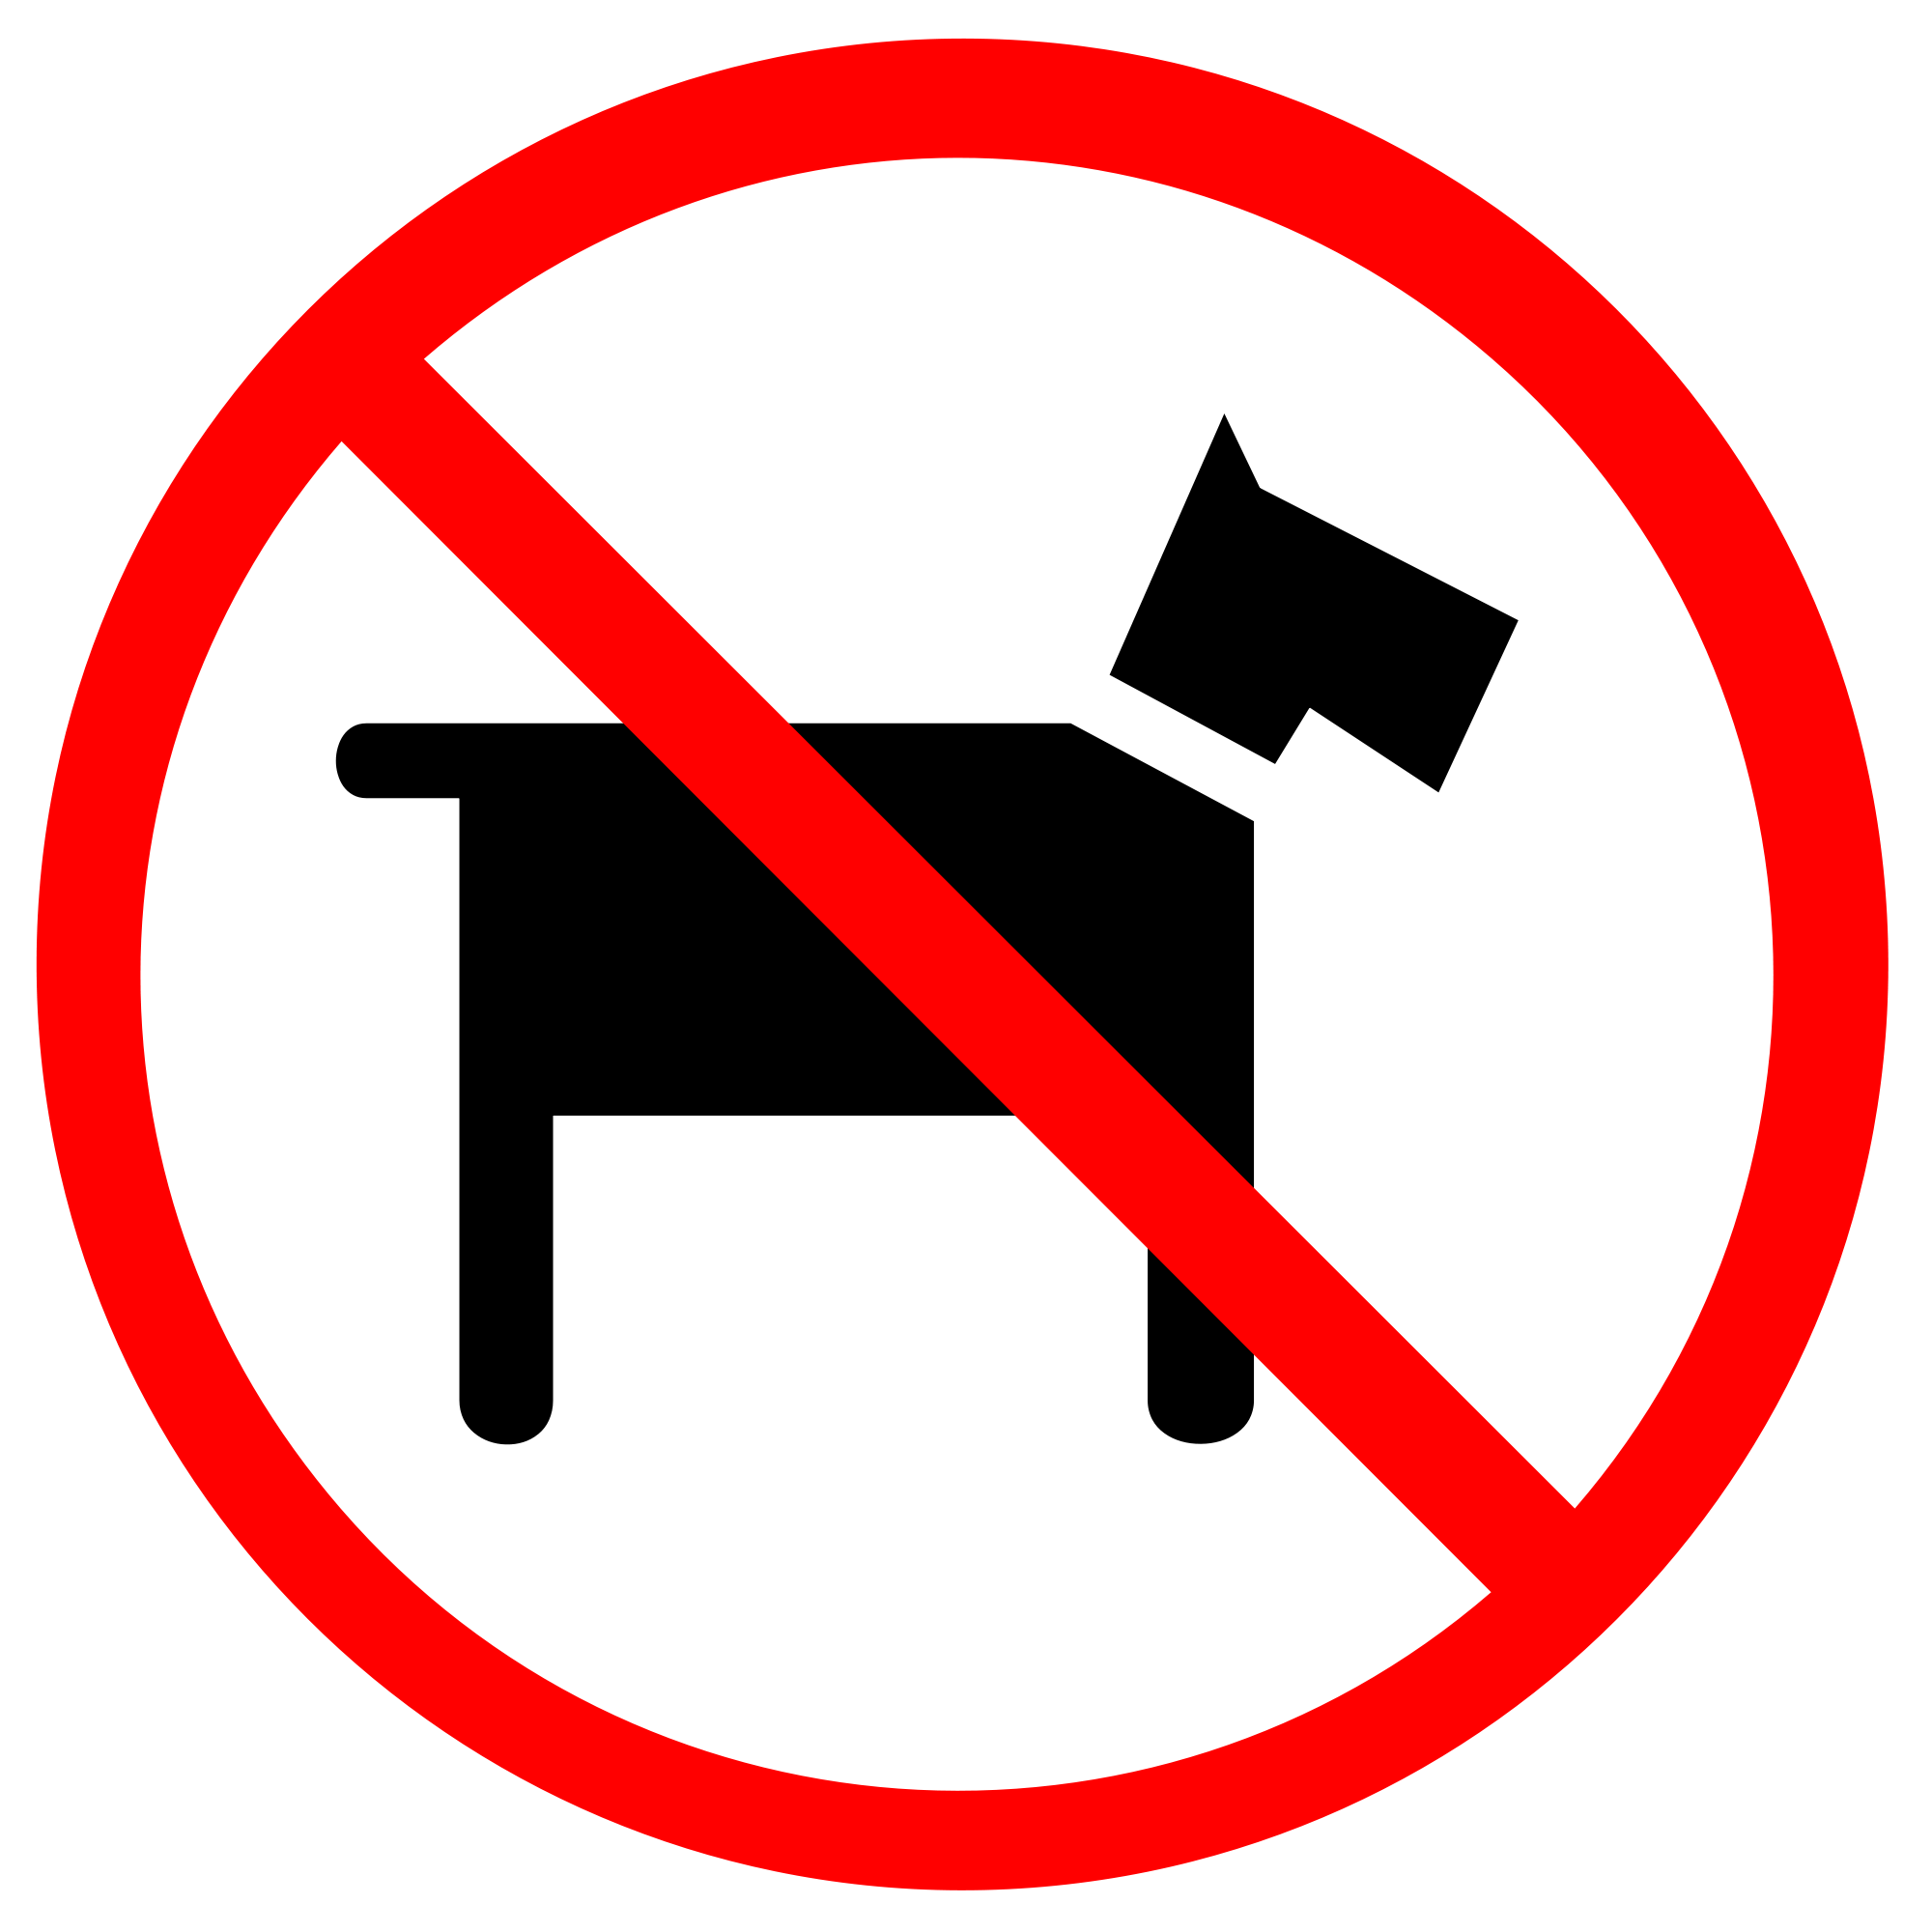 File:No dogs.svg - Wikimedia Commons